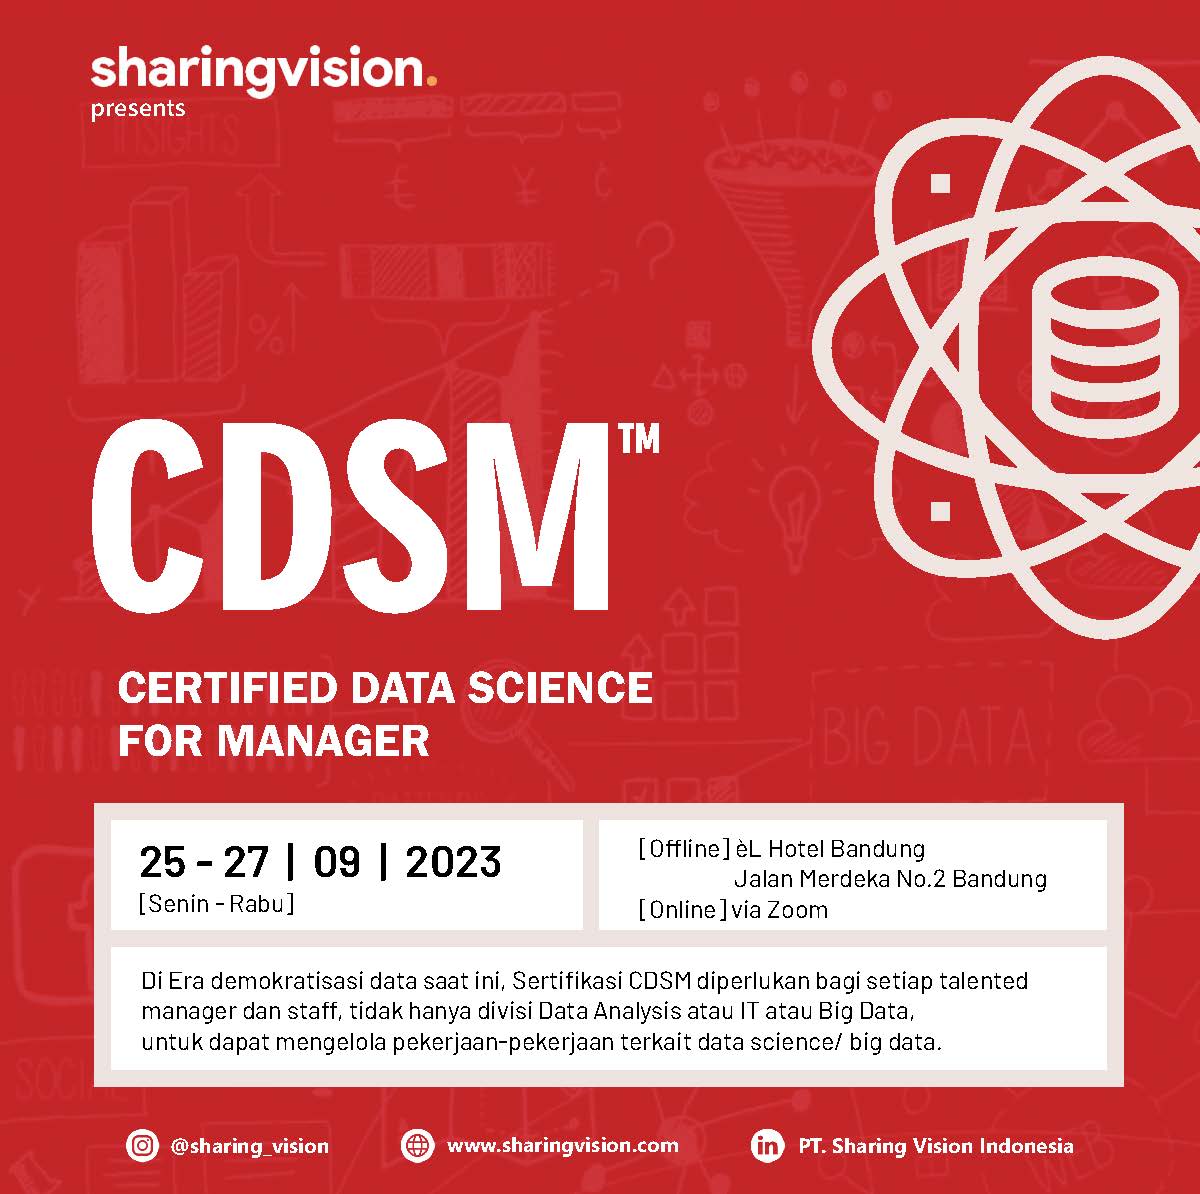 cdsm-certified-data-science-for-manager